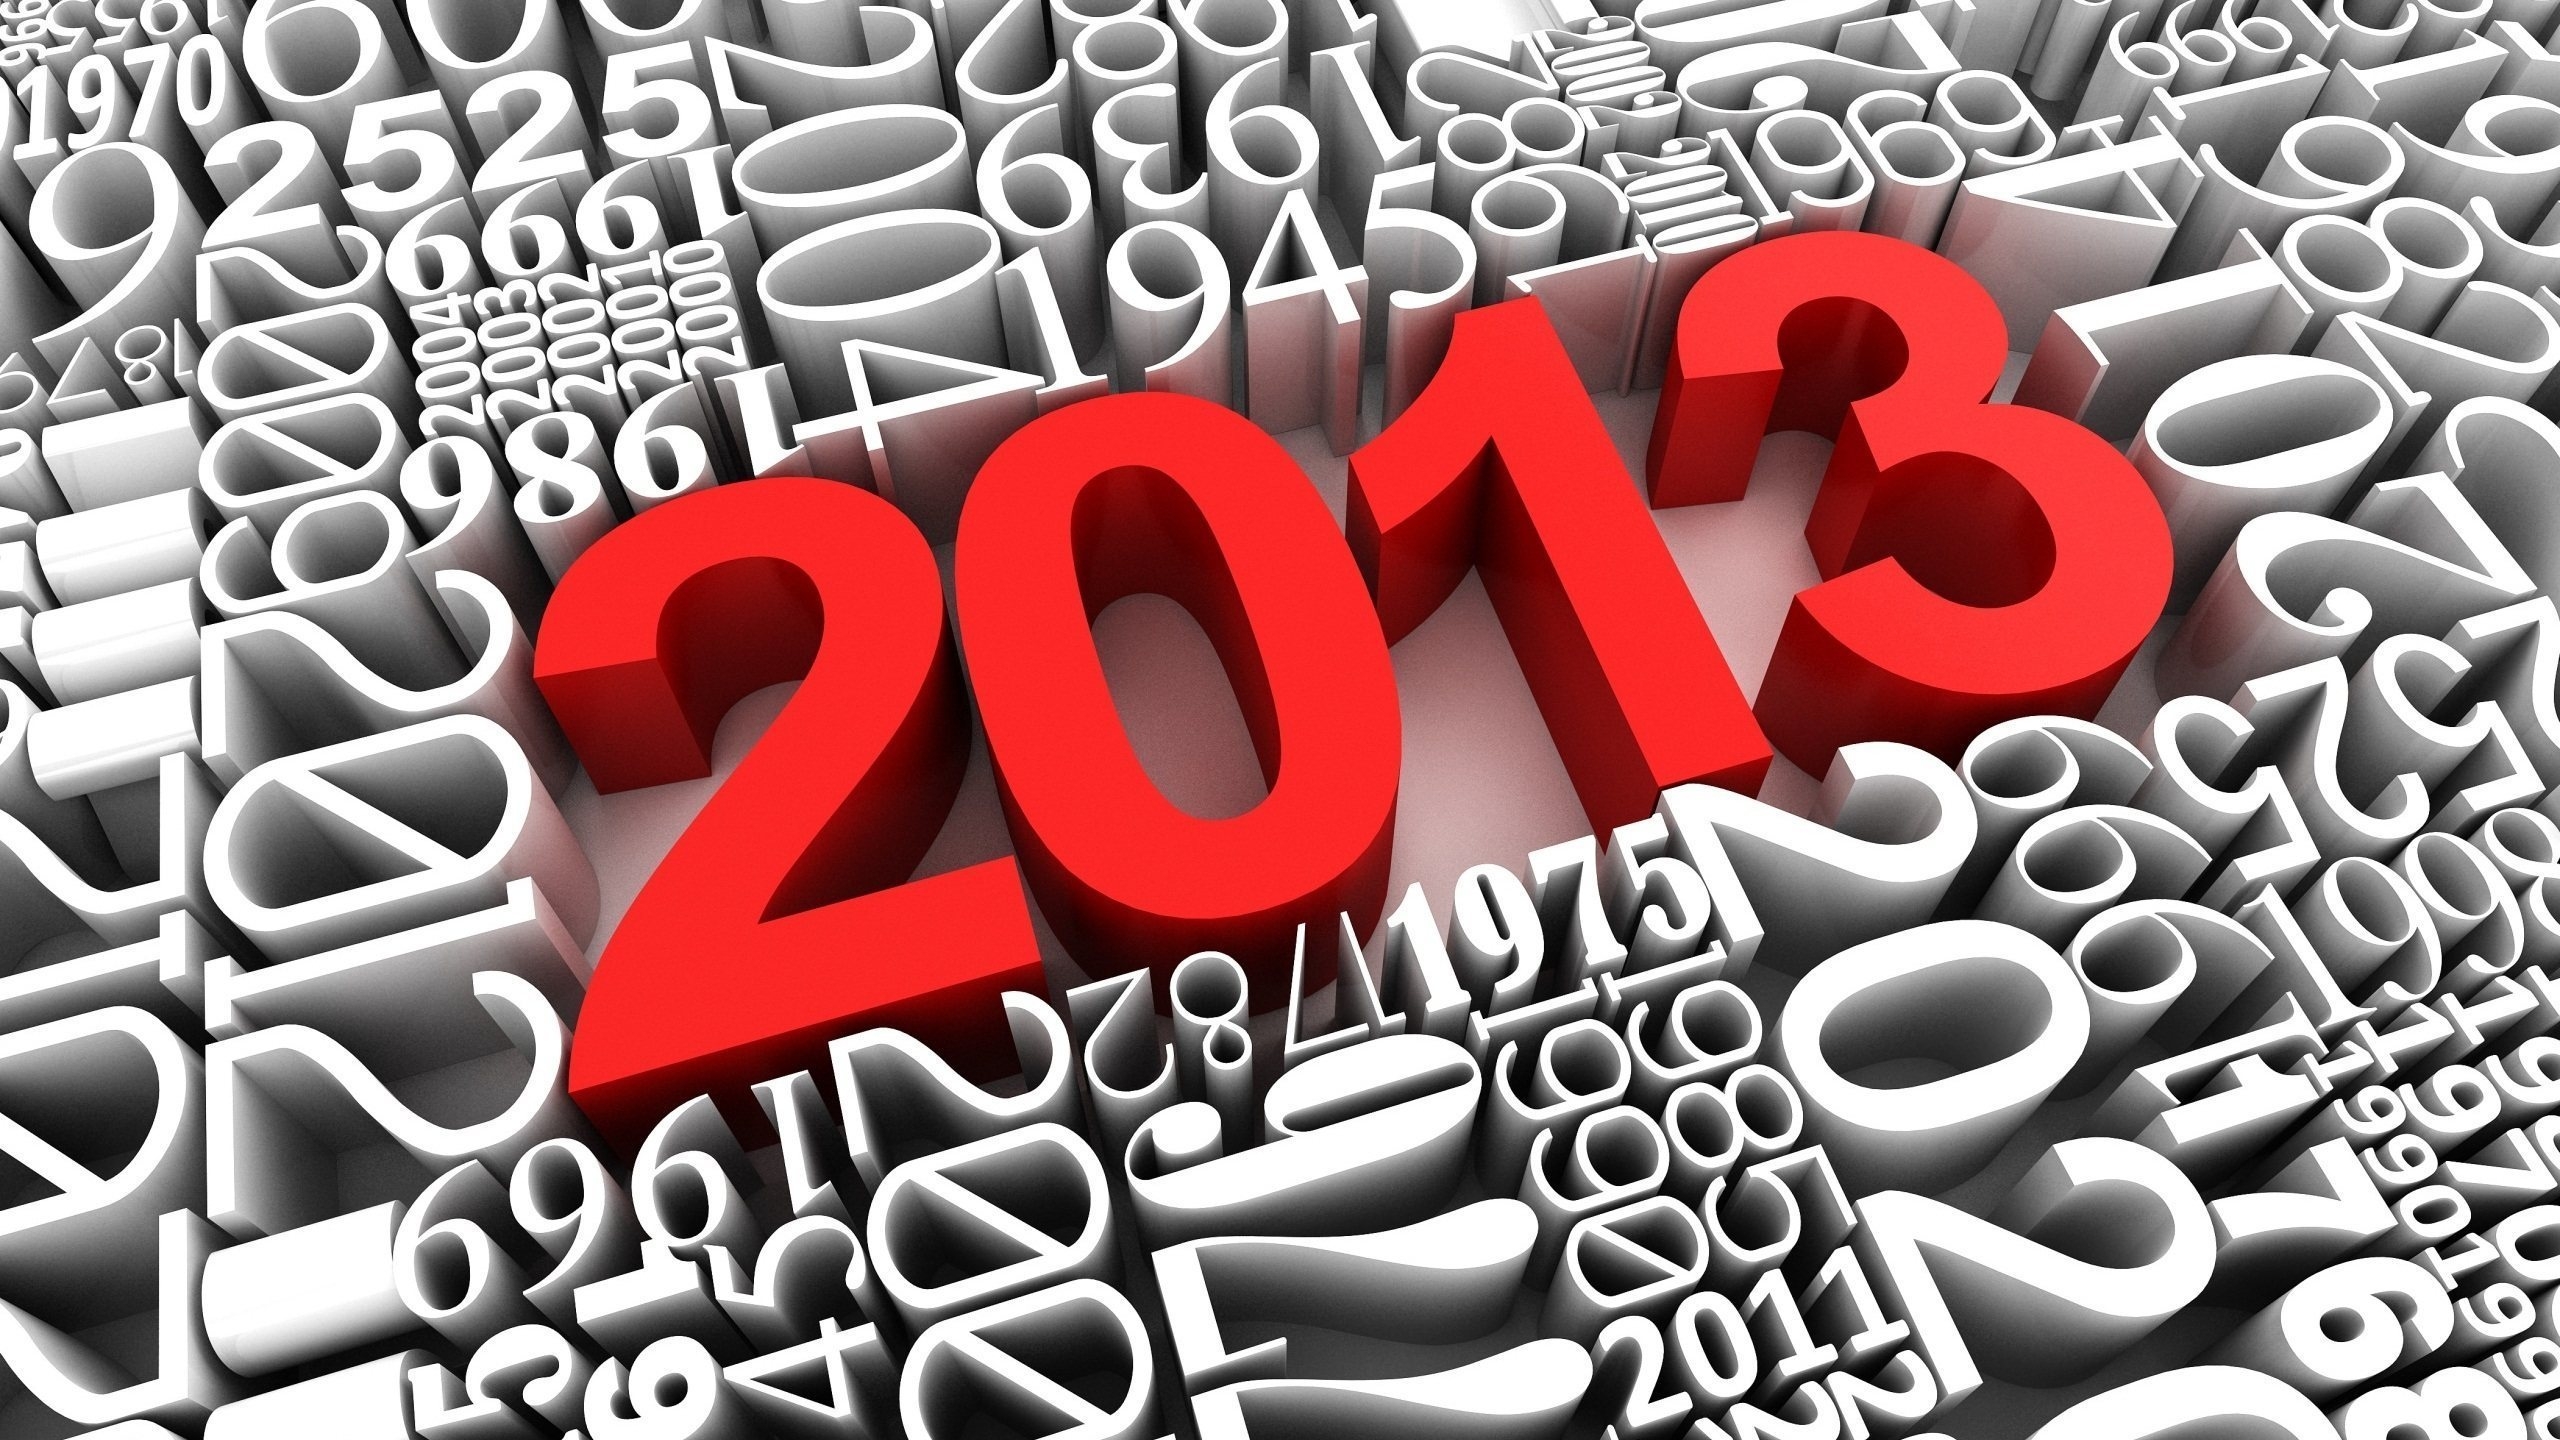 2013 New Year 3D for 2560x1440 HDTV resolution